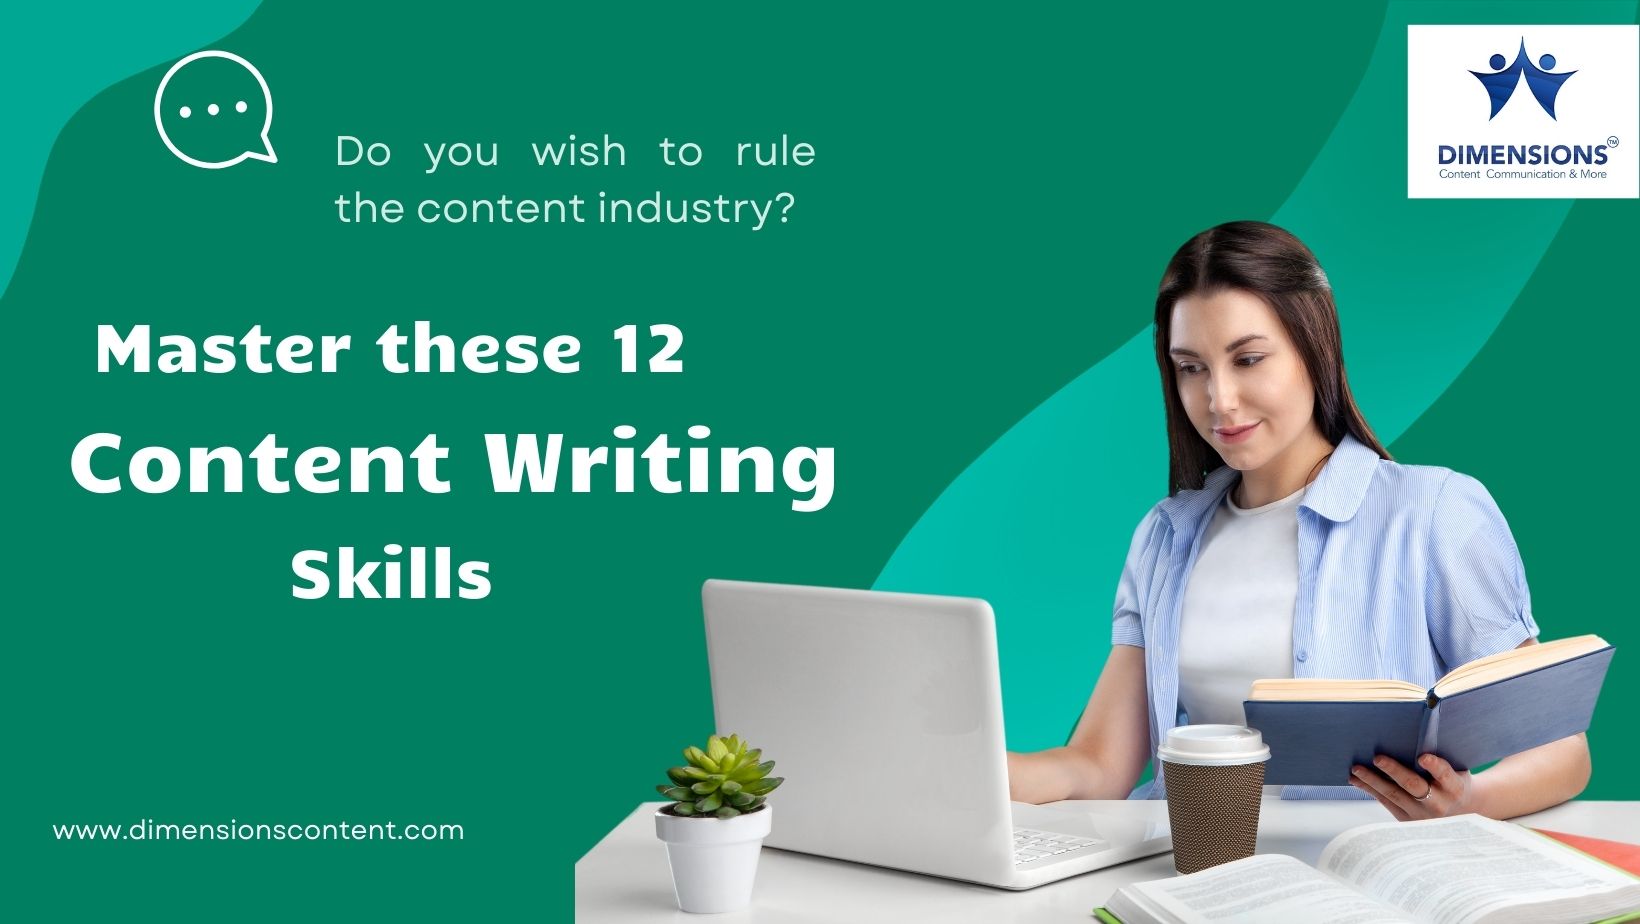 Take the time to develop these 12 content writing skills continually, and you’ll find yourself able to craft the kind of content that’s both easy for readers to find, compelling to read, and in demand.